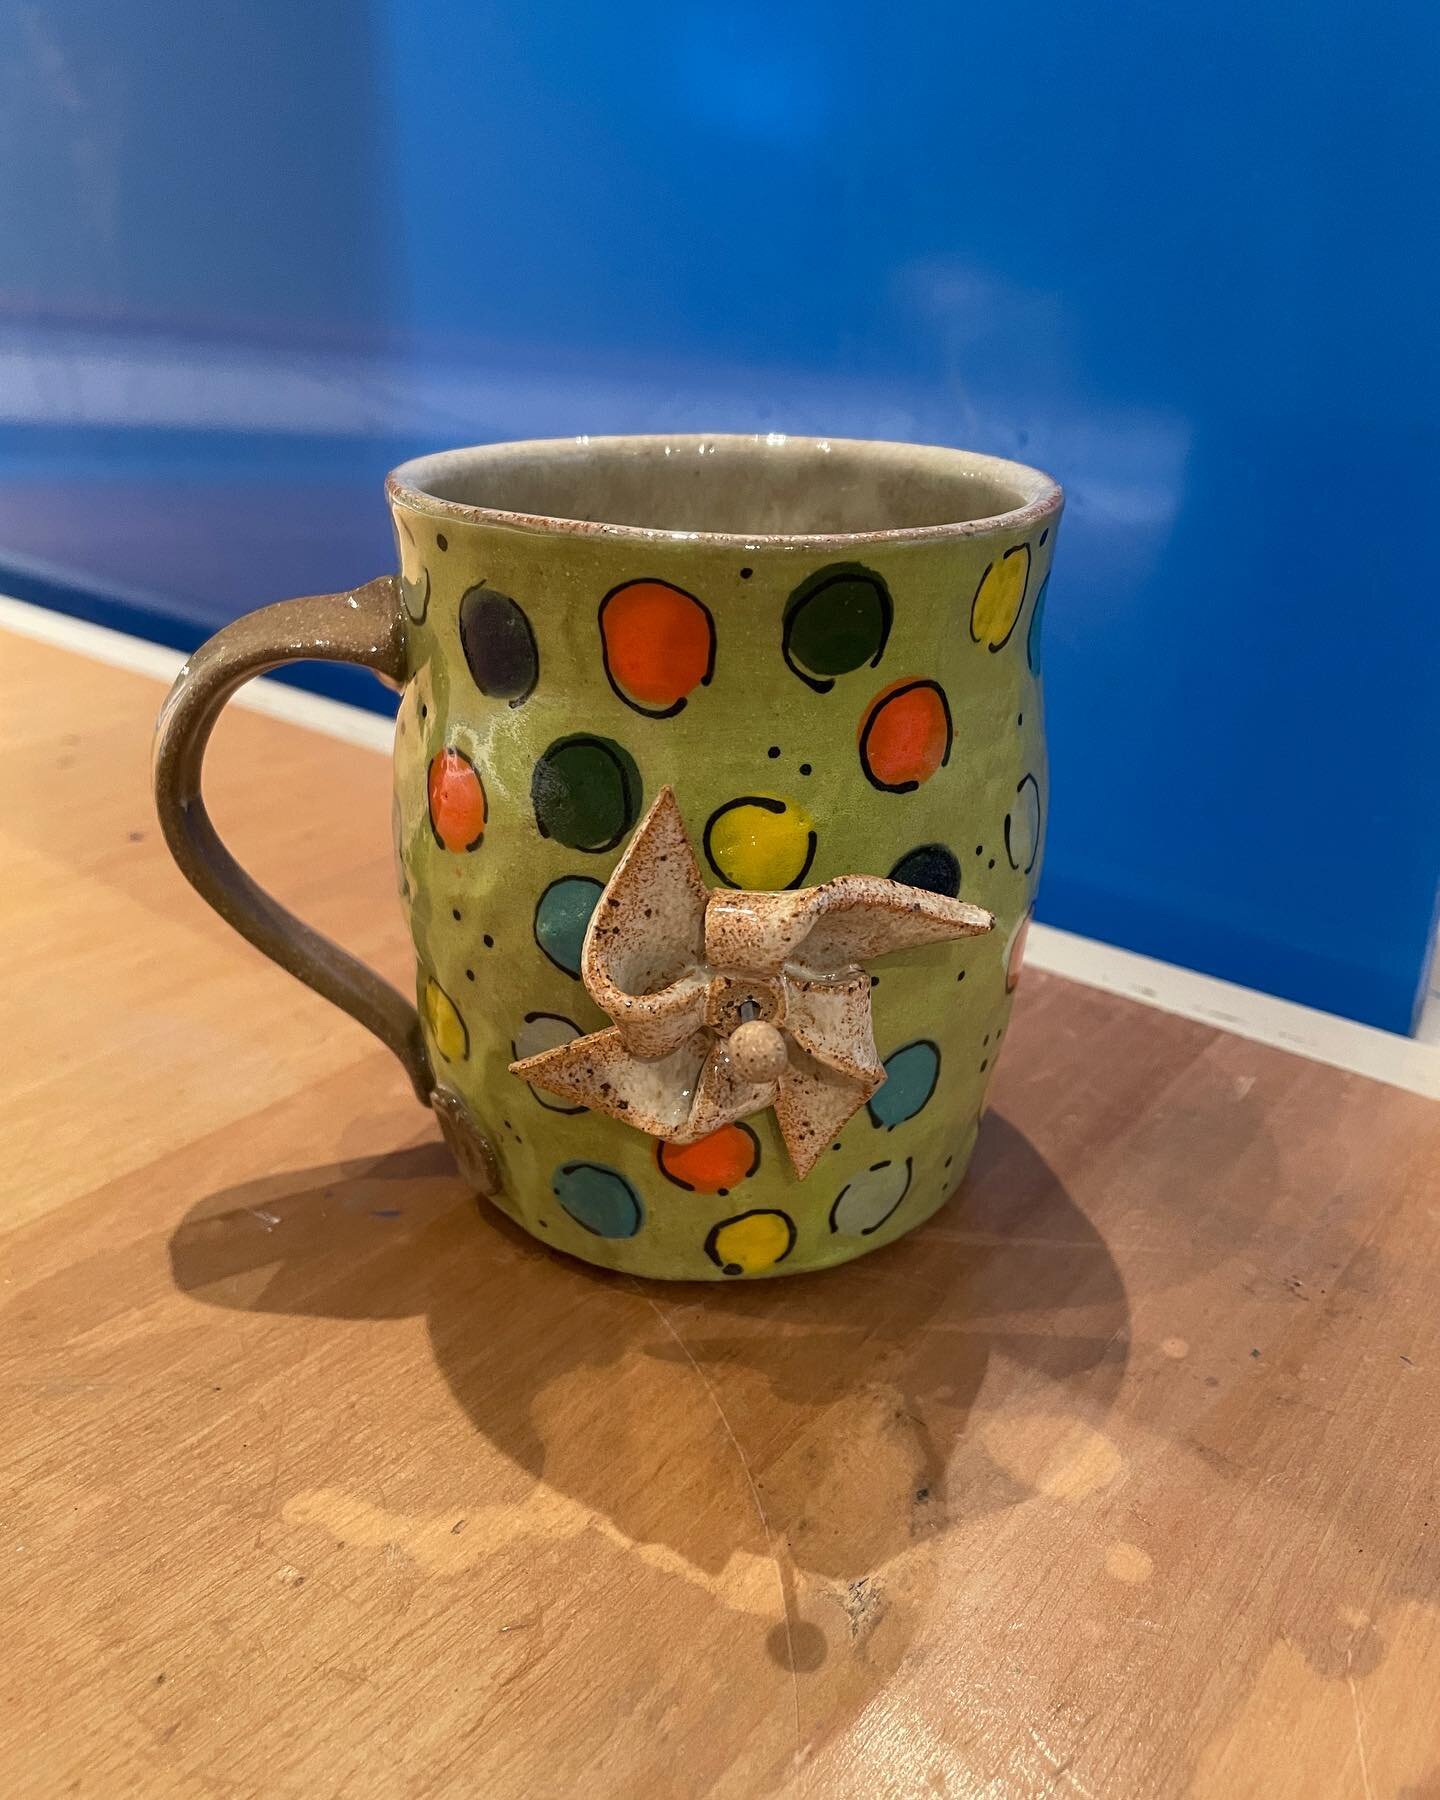 Very excited to have received my mug made by @kilnfag. Lime green with polka dots, AND a pinwheel that spins?!!! Love, love, love!!! 💕💚💕